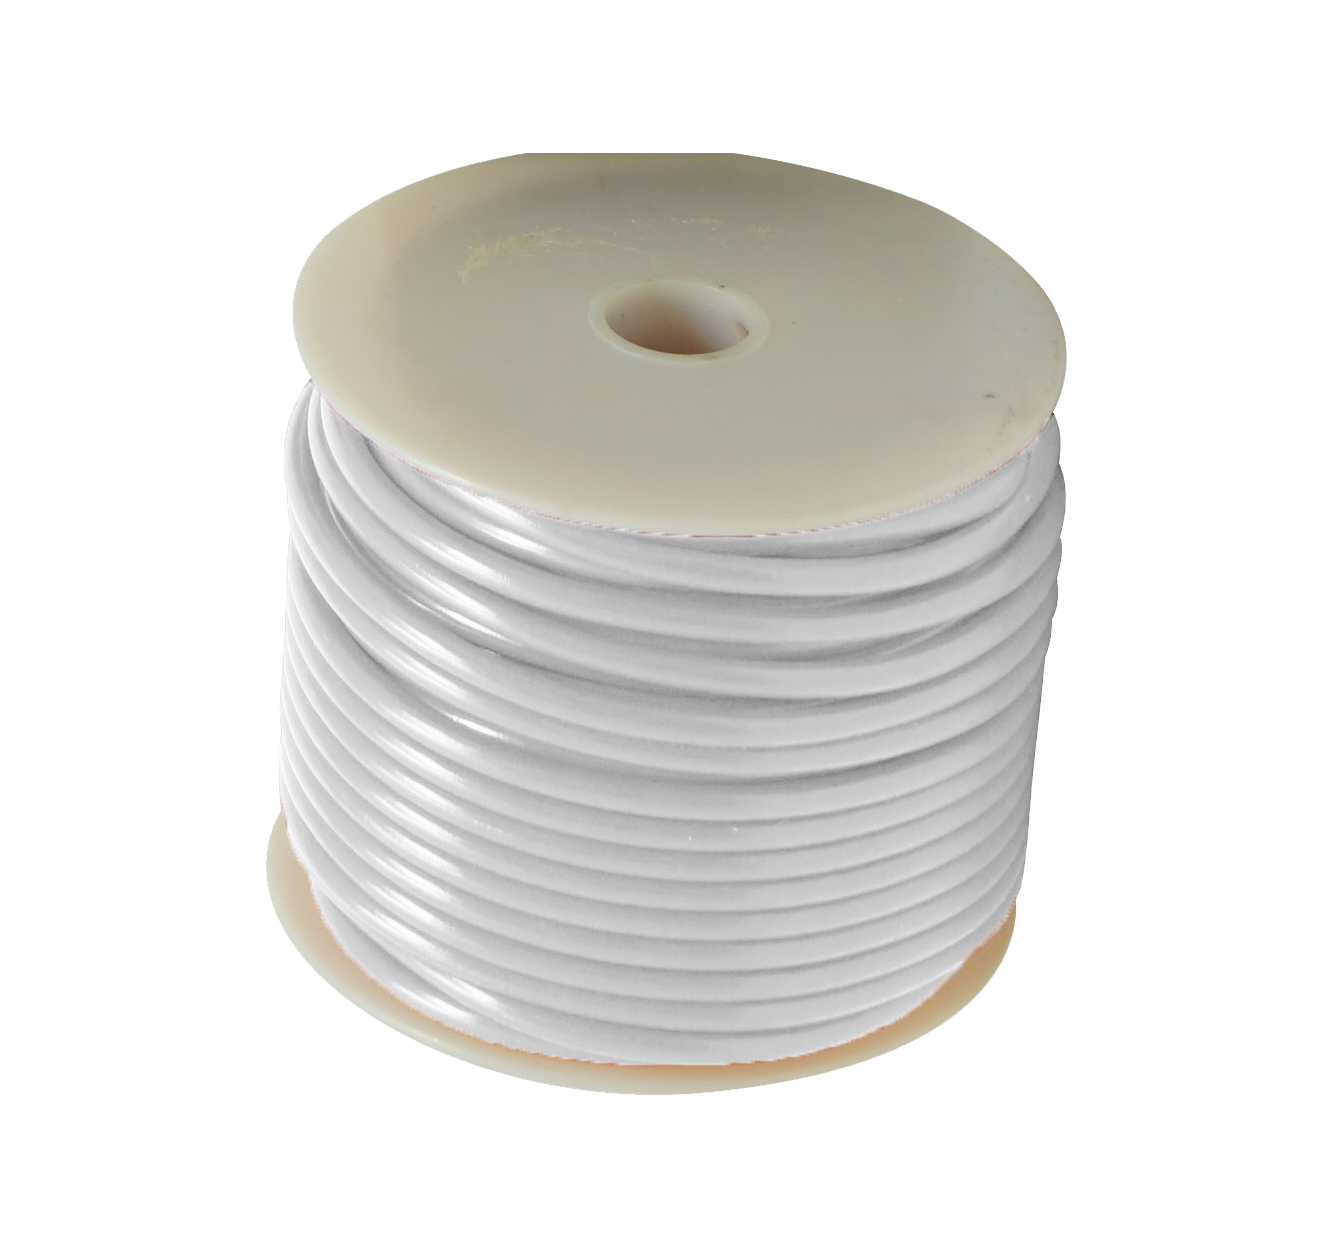 Southwire 55671923 Primary Wire, 10-Gauge Bulk Spool, 100-Feet, White